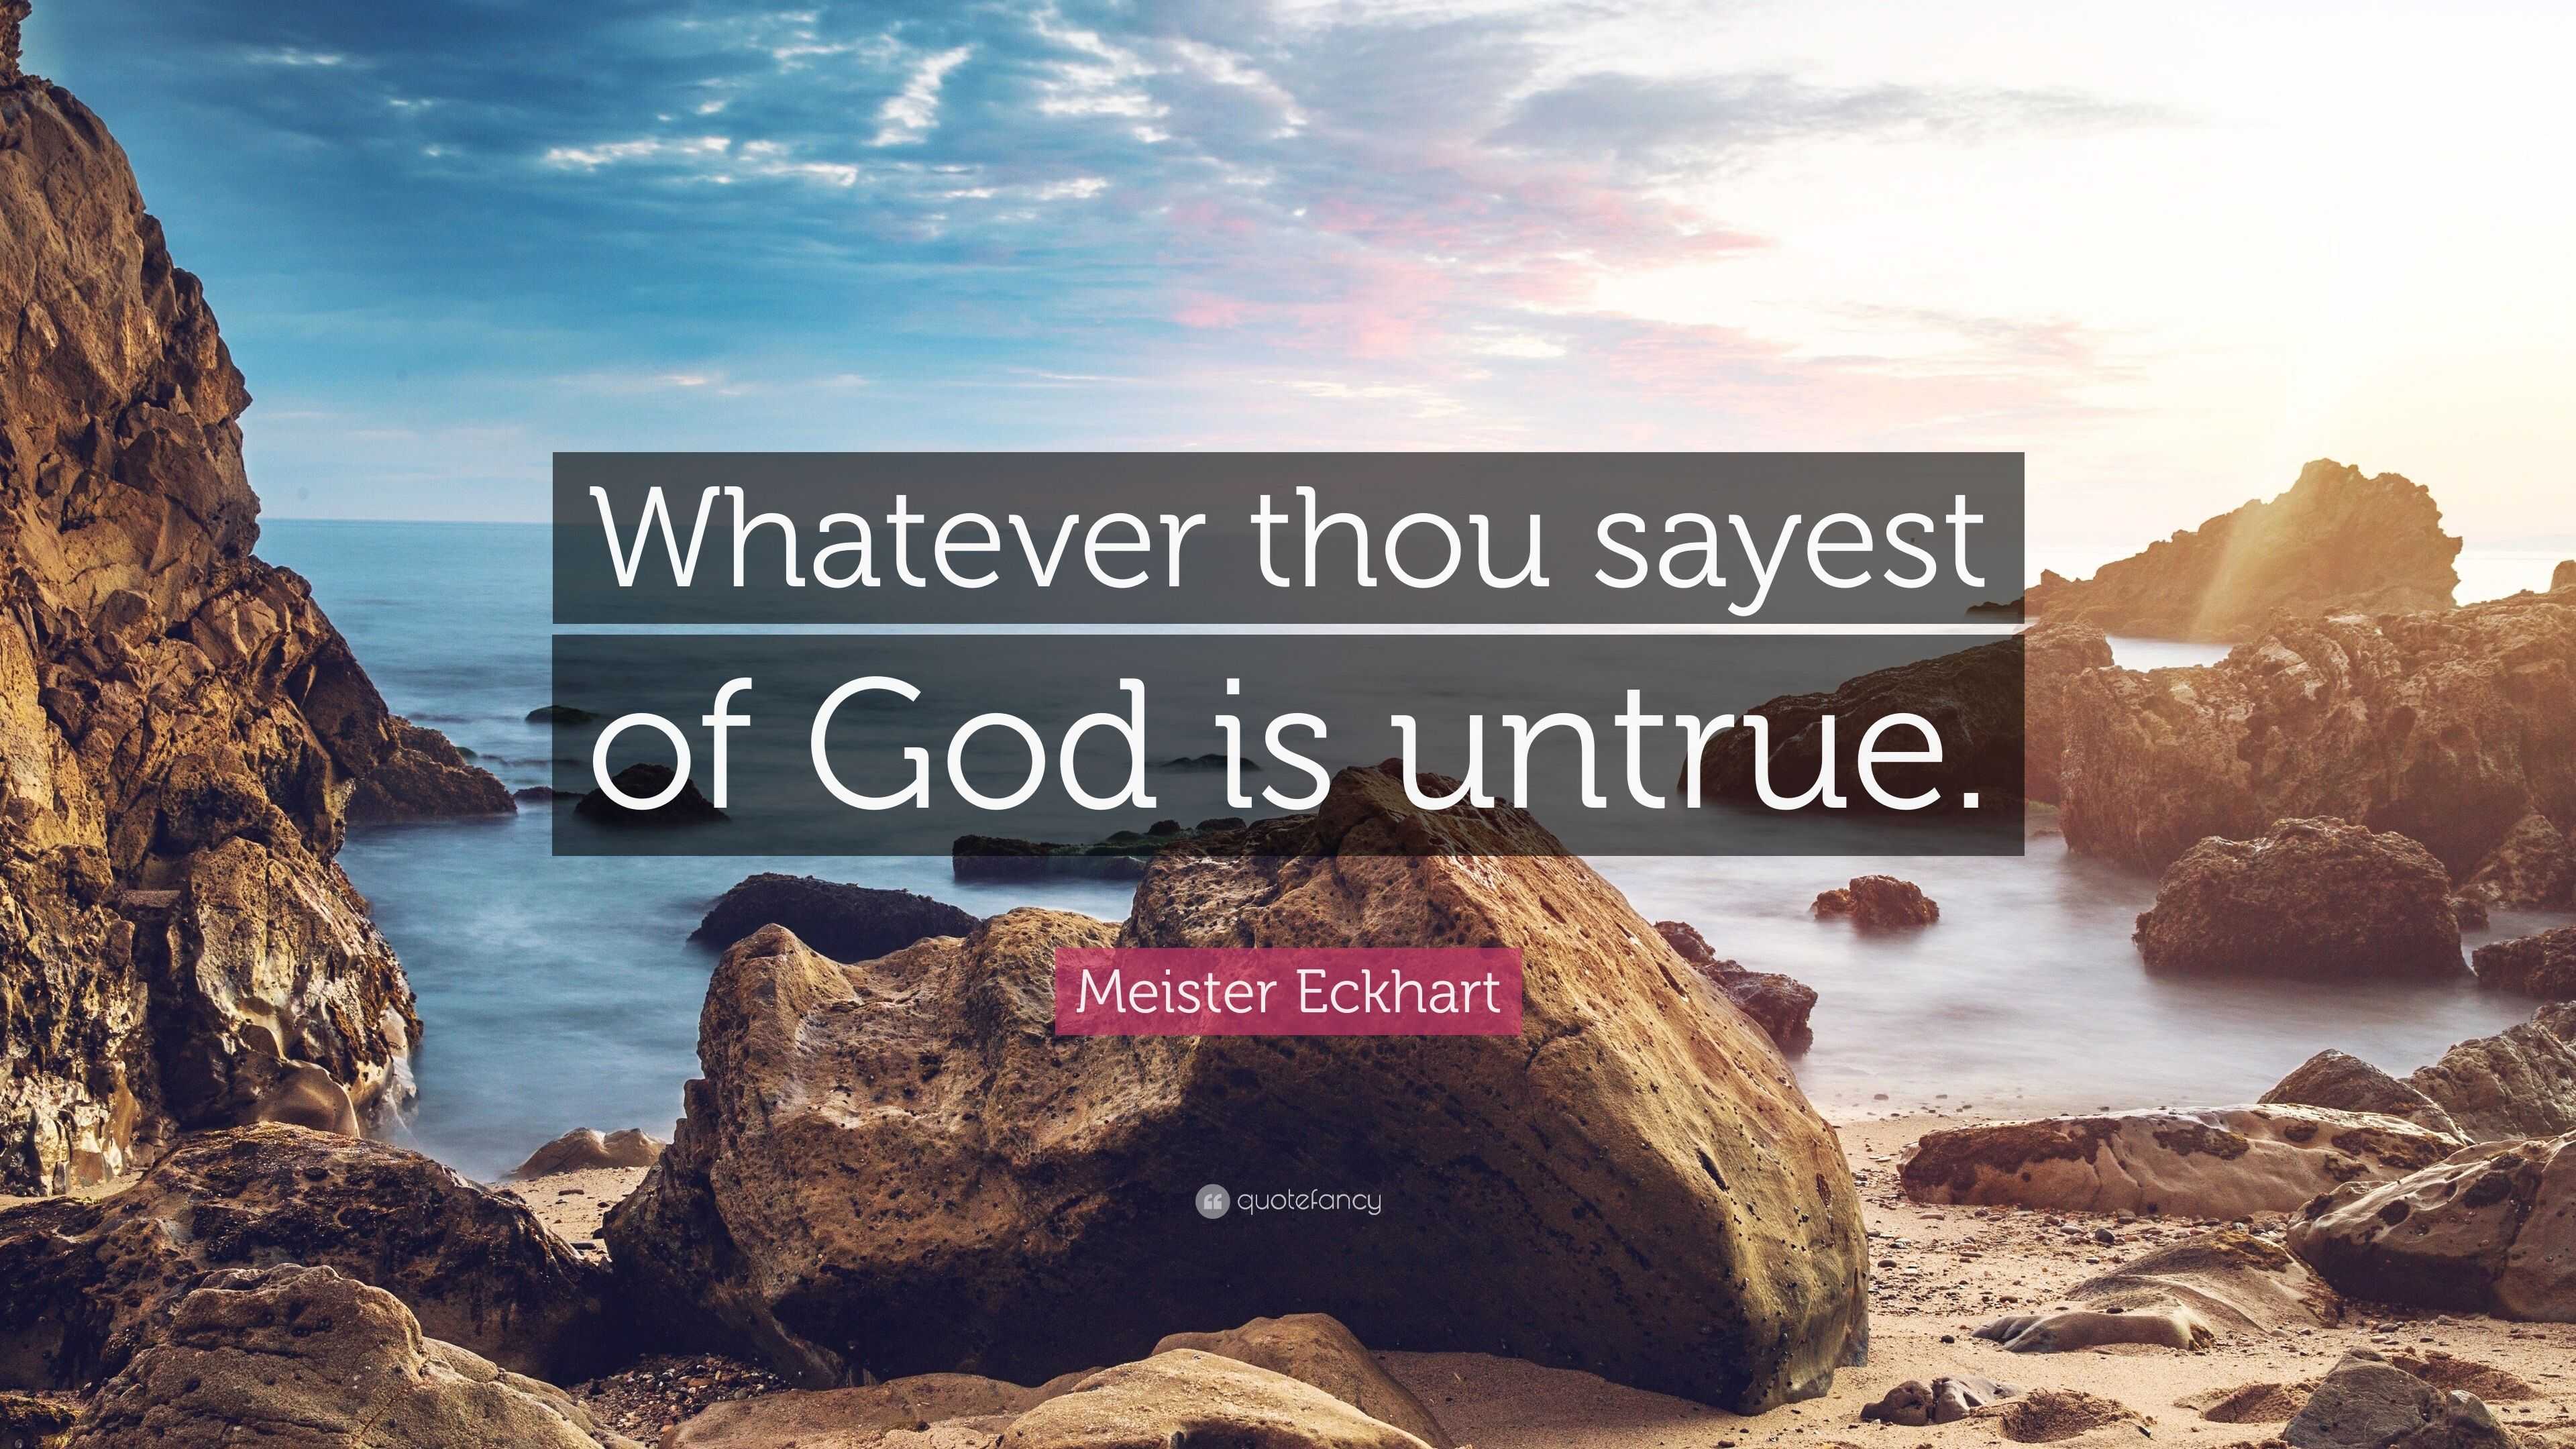 Meister Eckhart Quote: “Whatever thou sayest of God is untrue.”